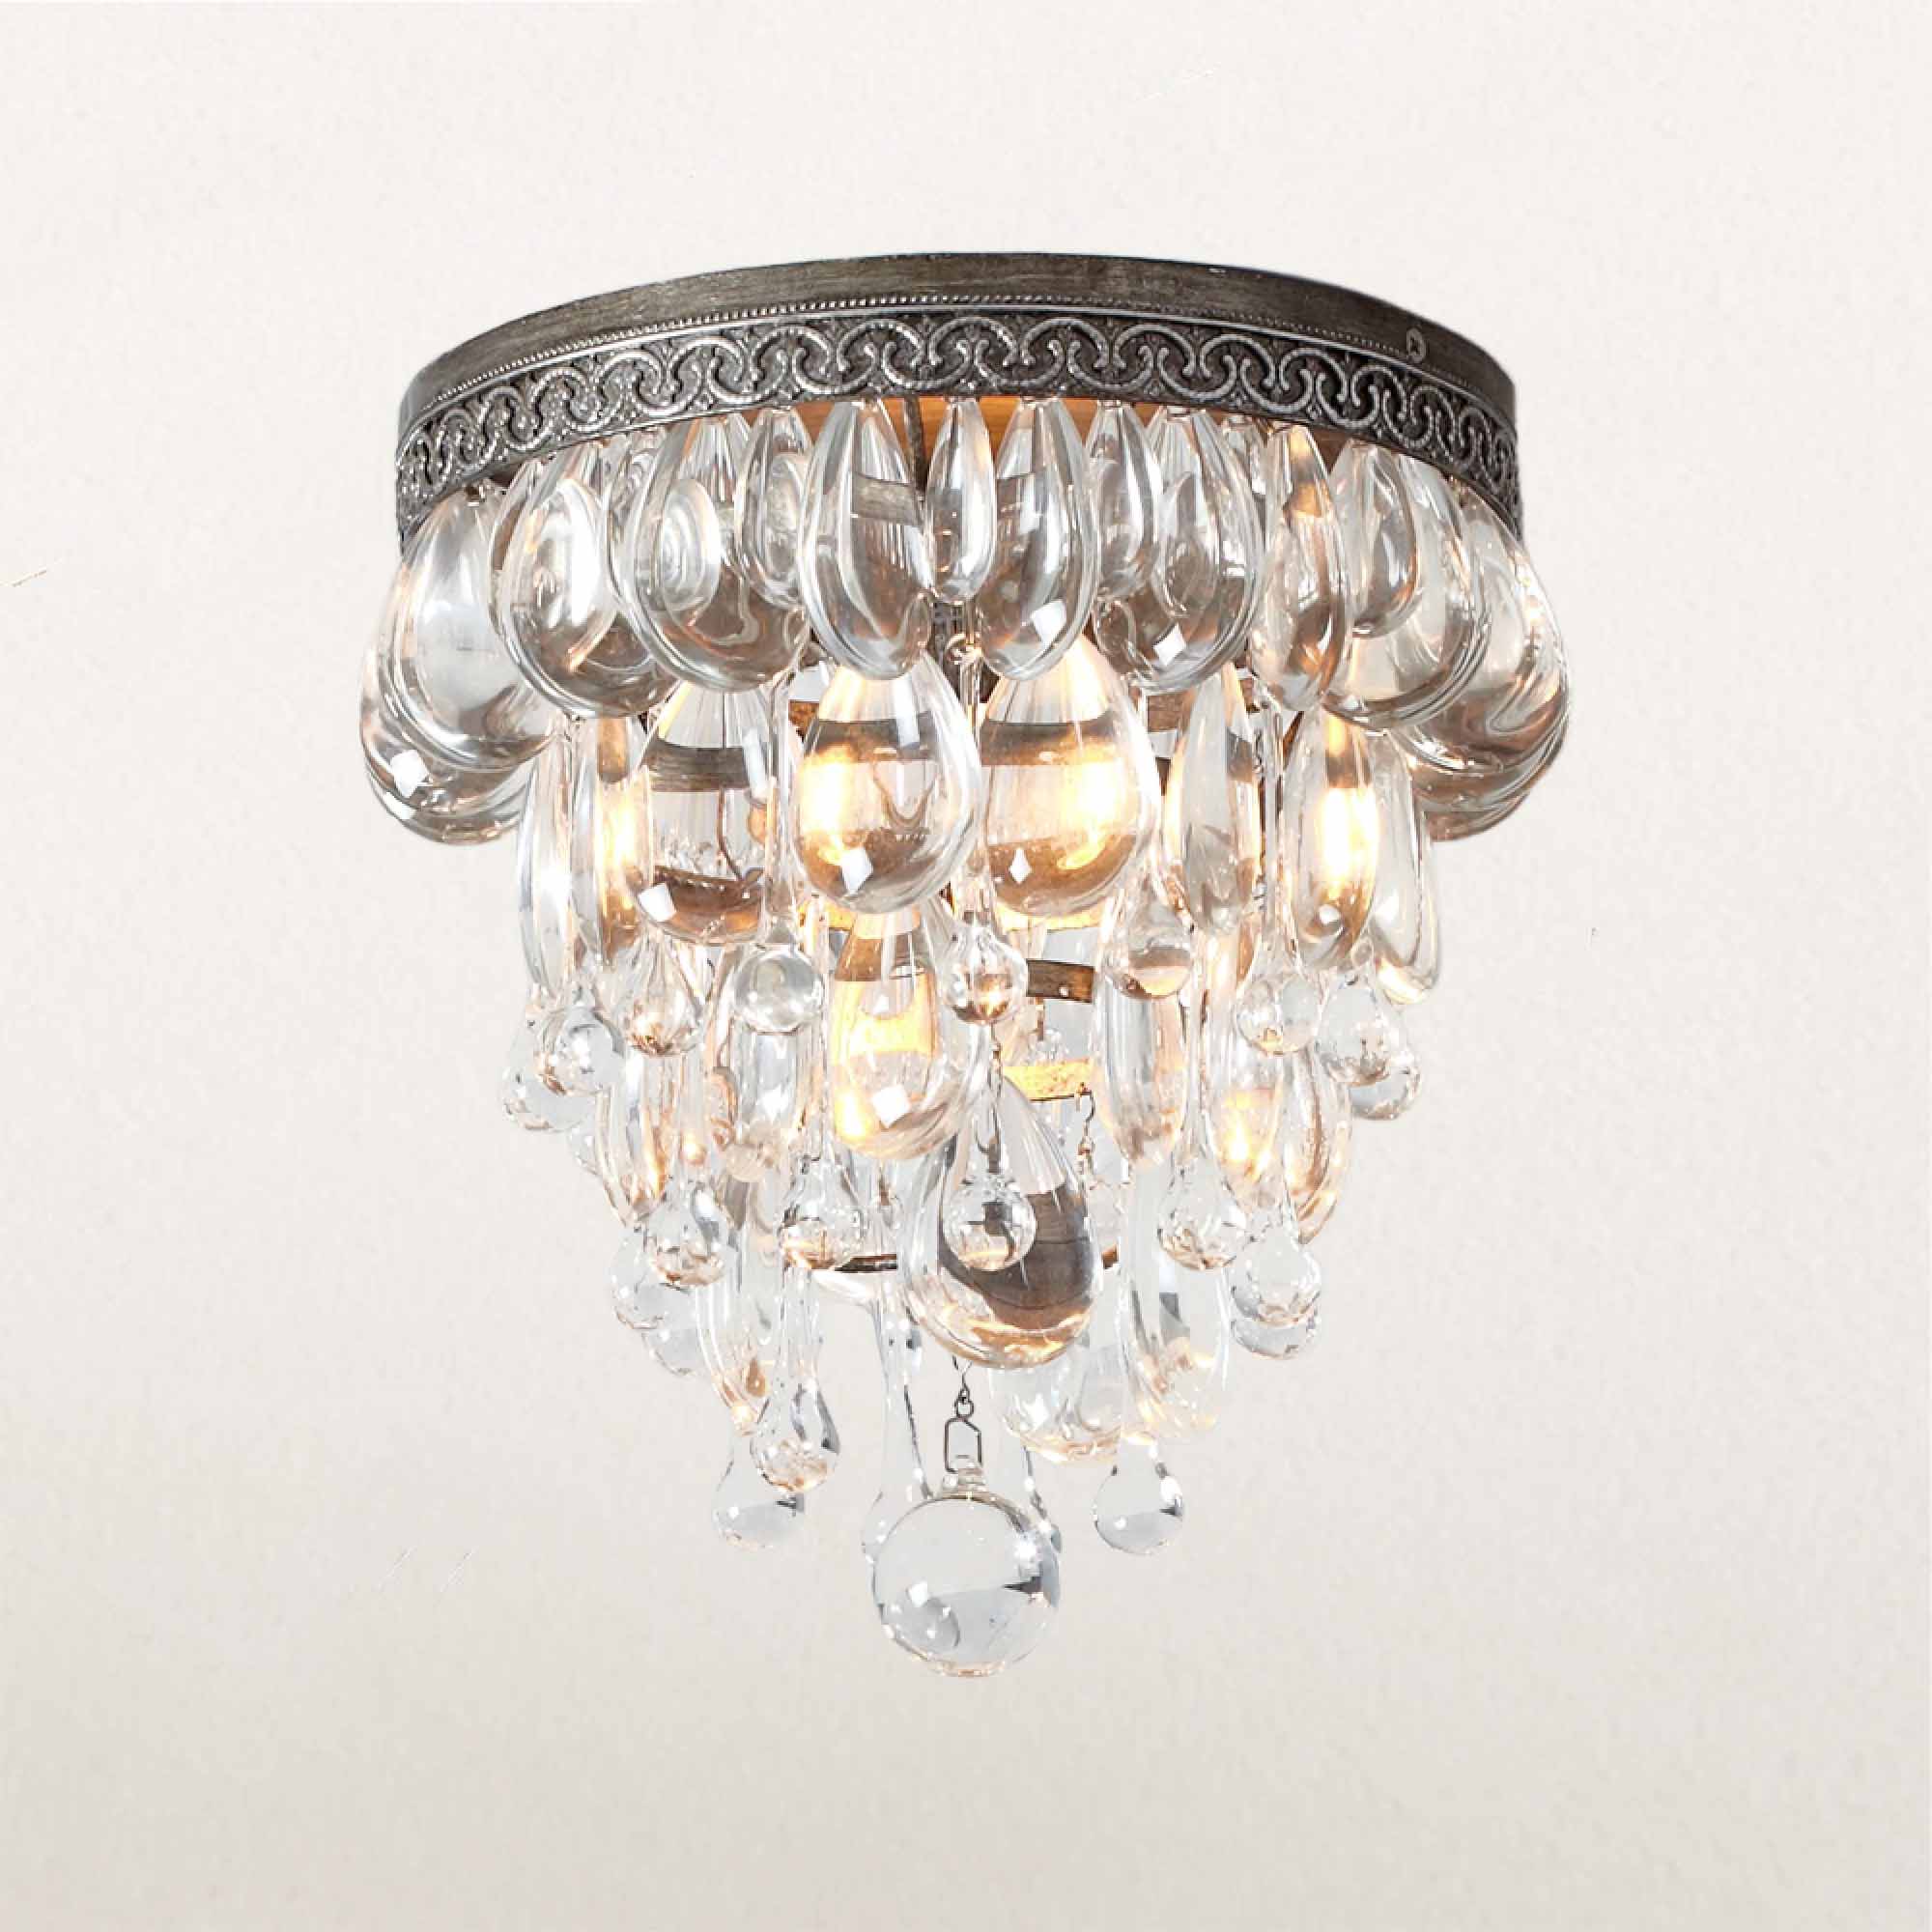 Raindrop Elegance Crystal Flush Mount - Faceted-Glass Crystals and Rain Drop Display for Bedroom and Living Room Lighting